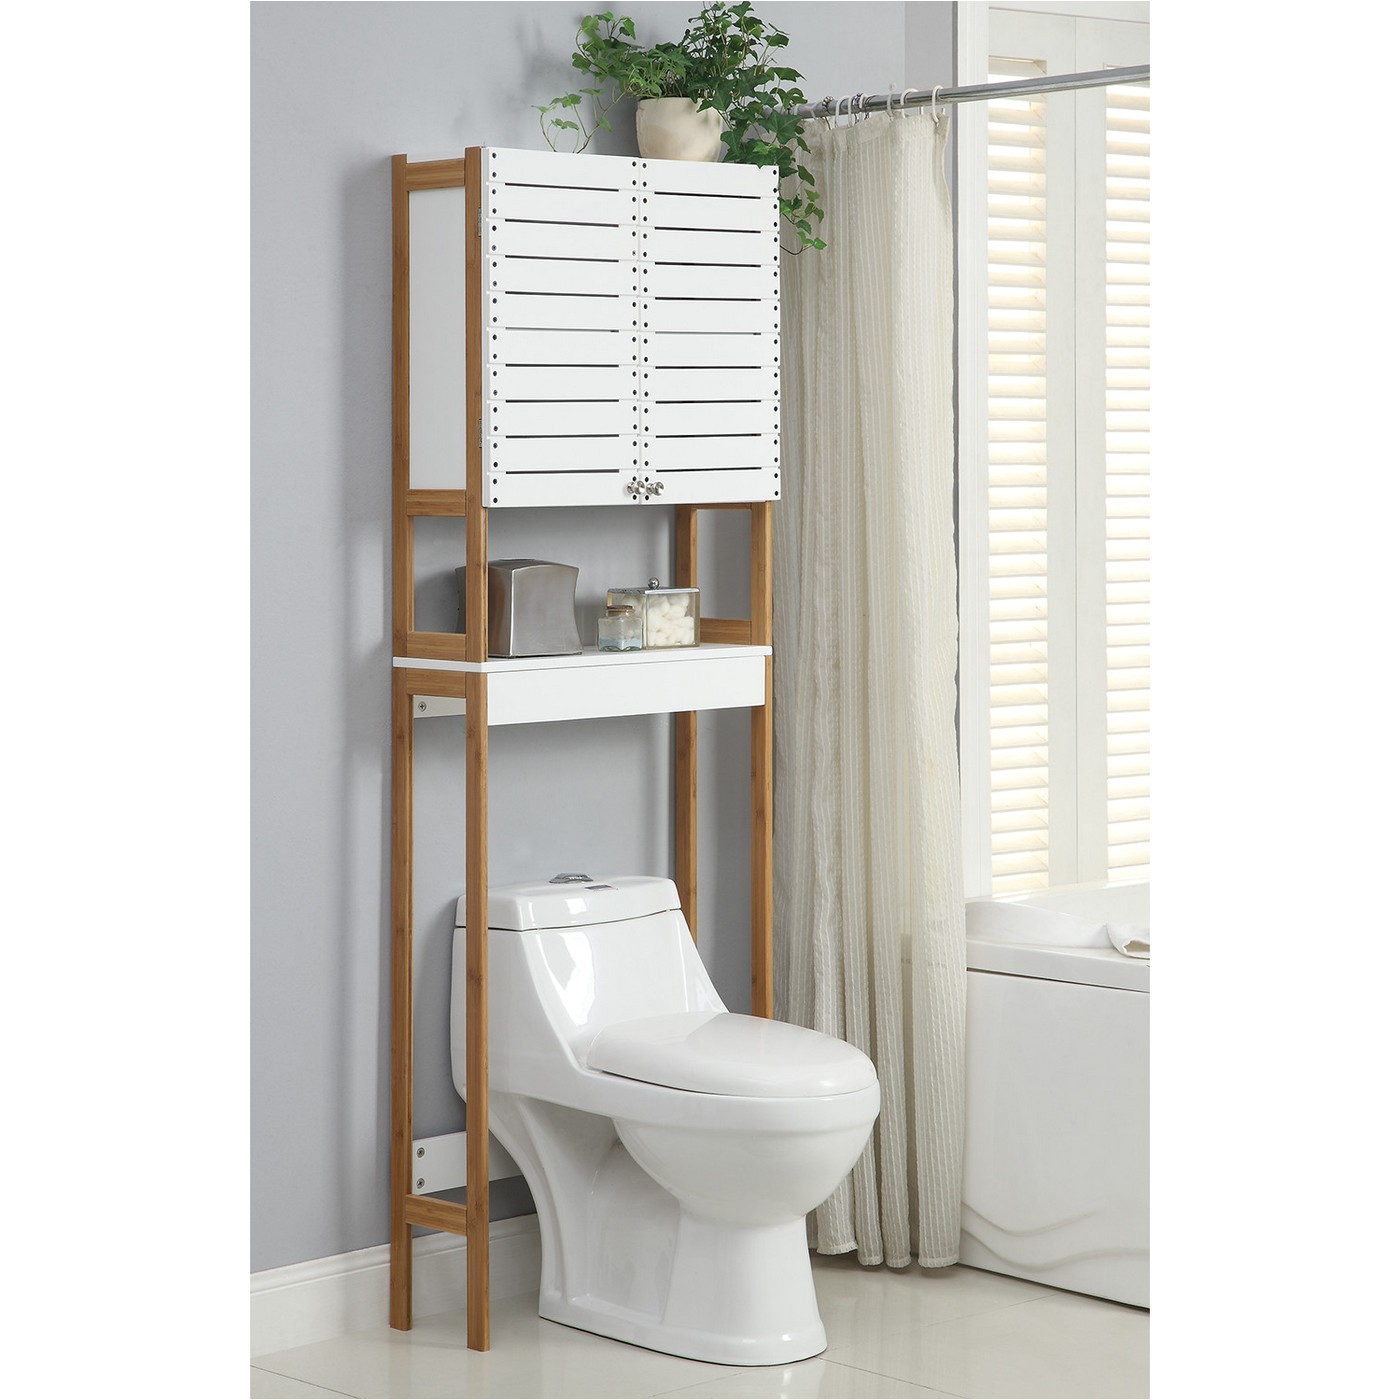 cabinets free standing over toilet free standing a ideal